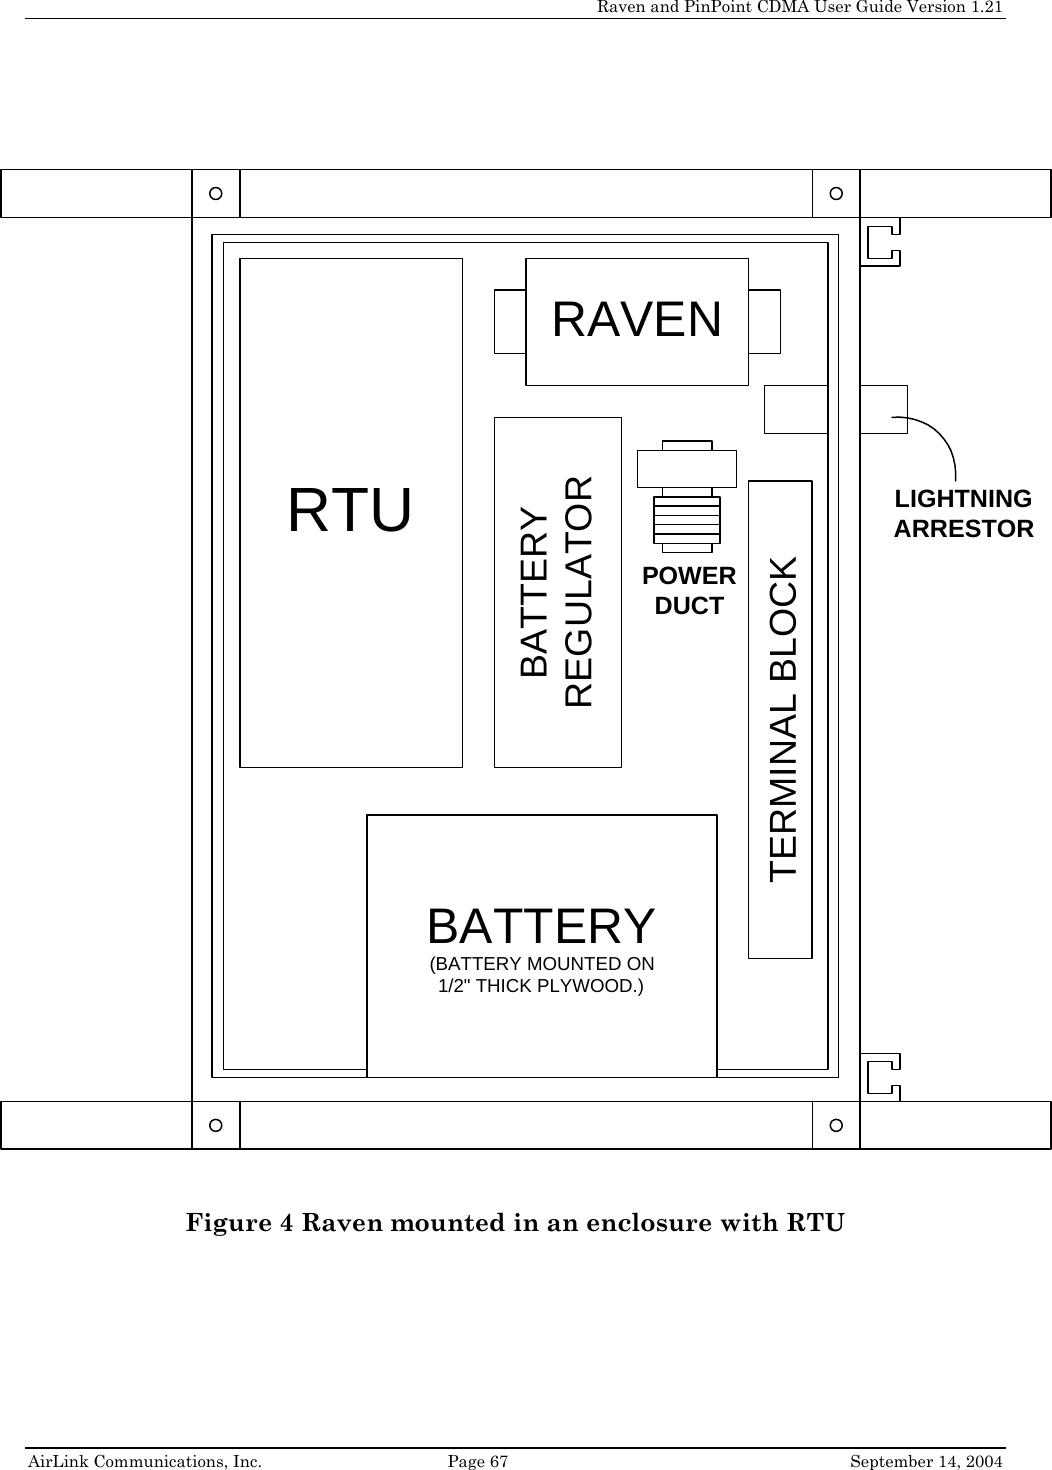     Raven and PinPoint CDMA User Guide Version 1.21  AirLink Communications, Inc.  Page 67  September 14, 2004   Figure 4 Raven mounted in an enclosure with RTU RTURAVENBATTERYREGULATORTERMINAL BLOCKPOWERDUCTLIGHTNINGARRESTORBATTERY(BATTERY MOUNTED ON1/2&quot; THICK PLYWOOD.)